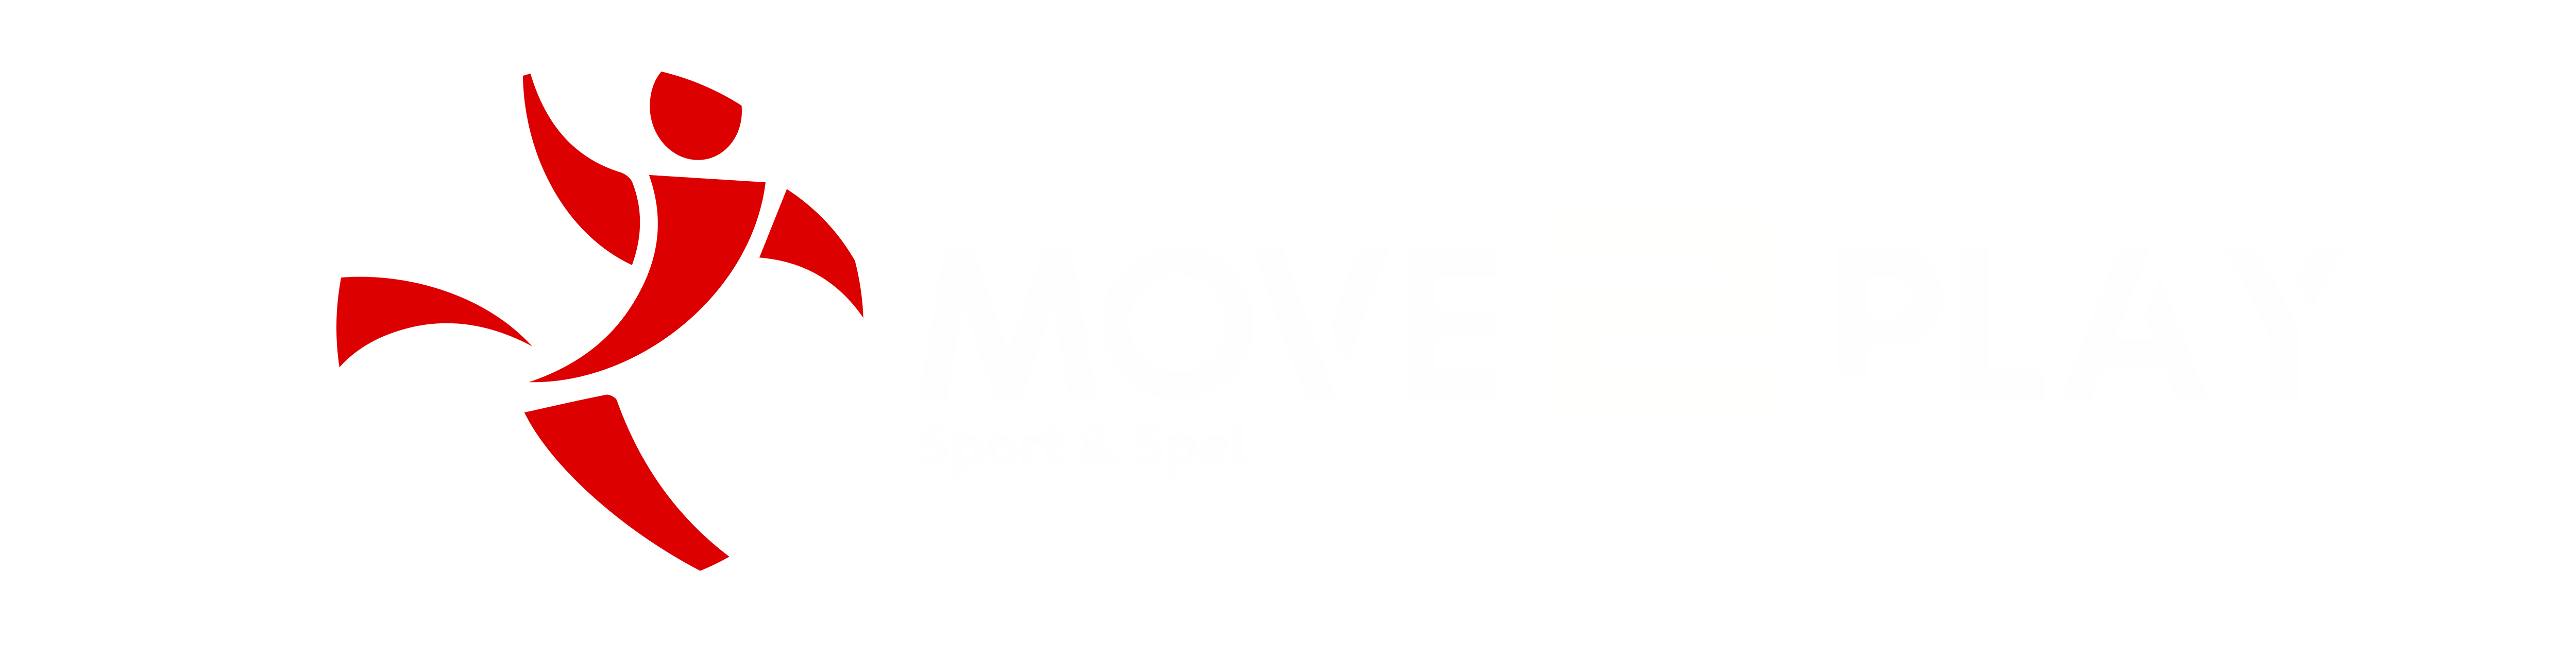 Move2play